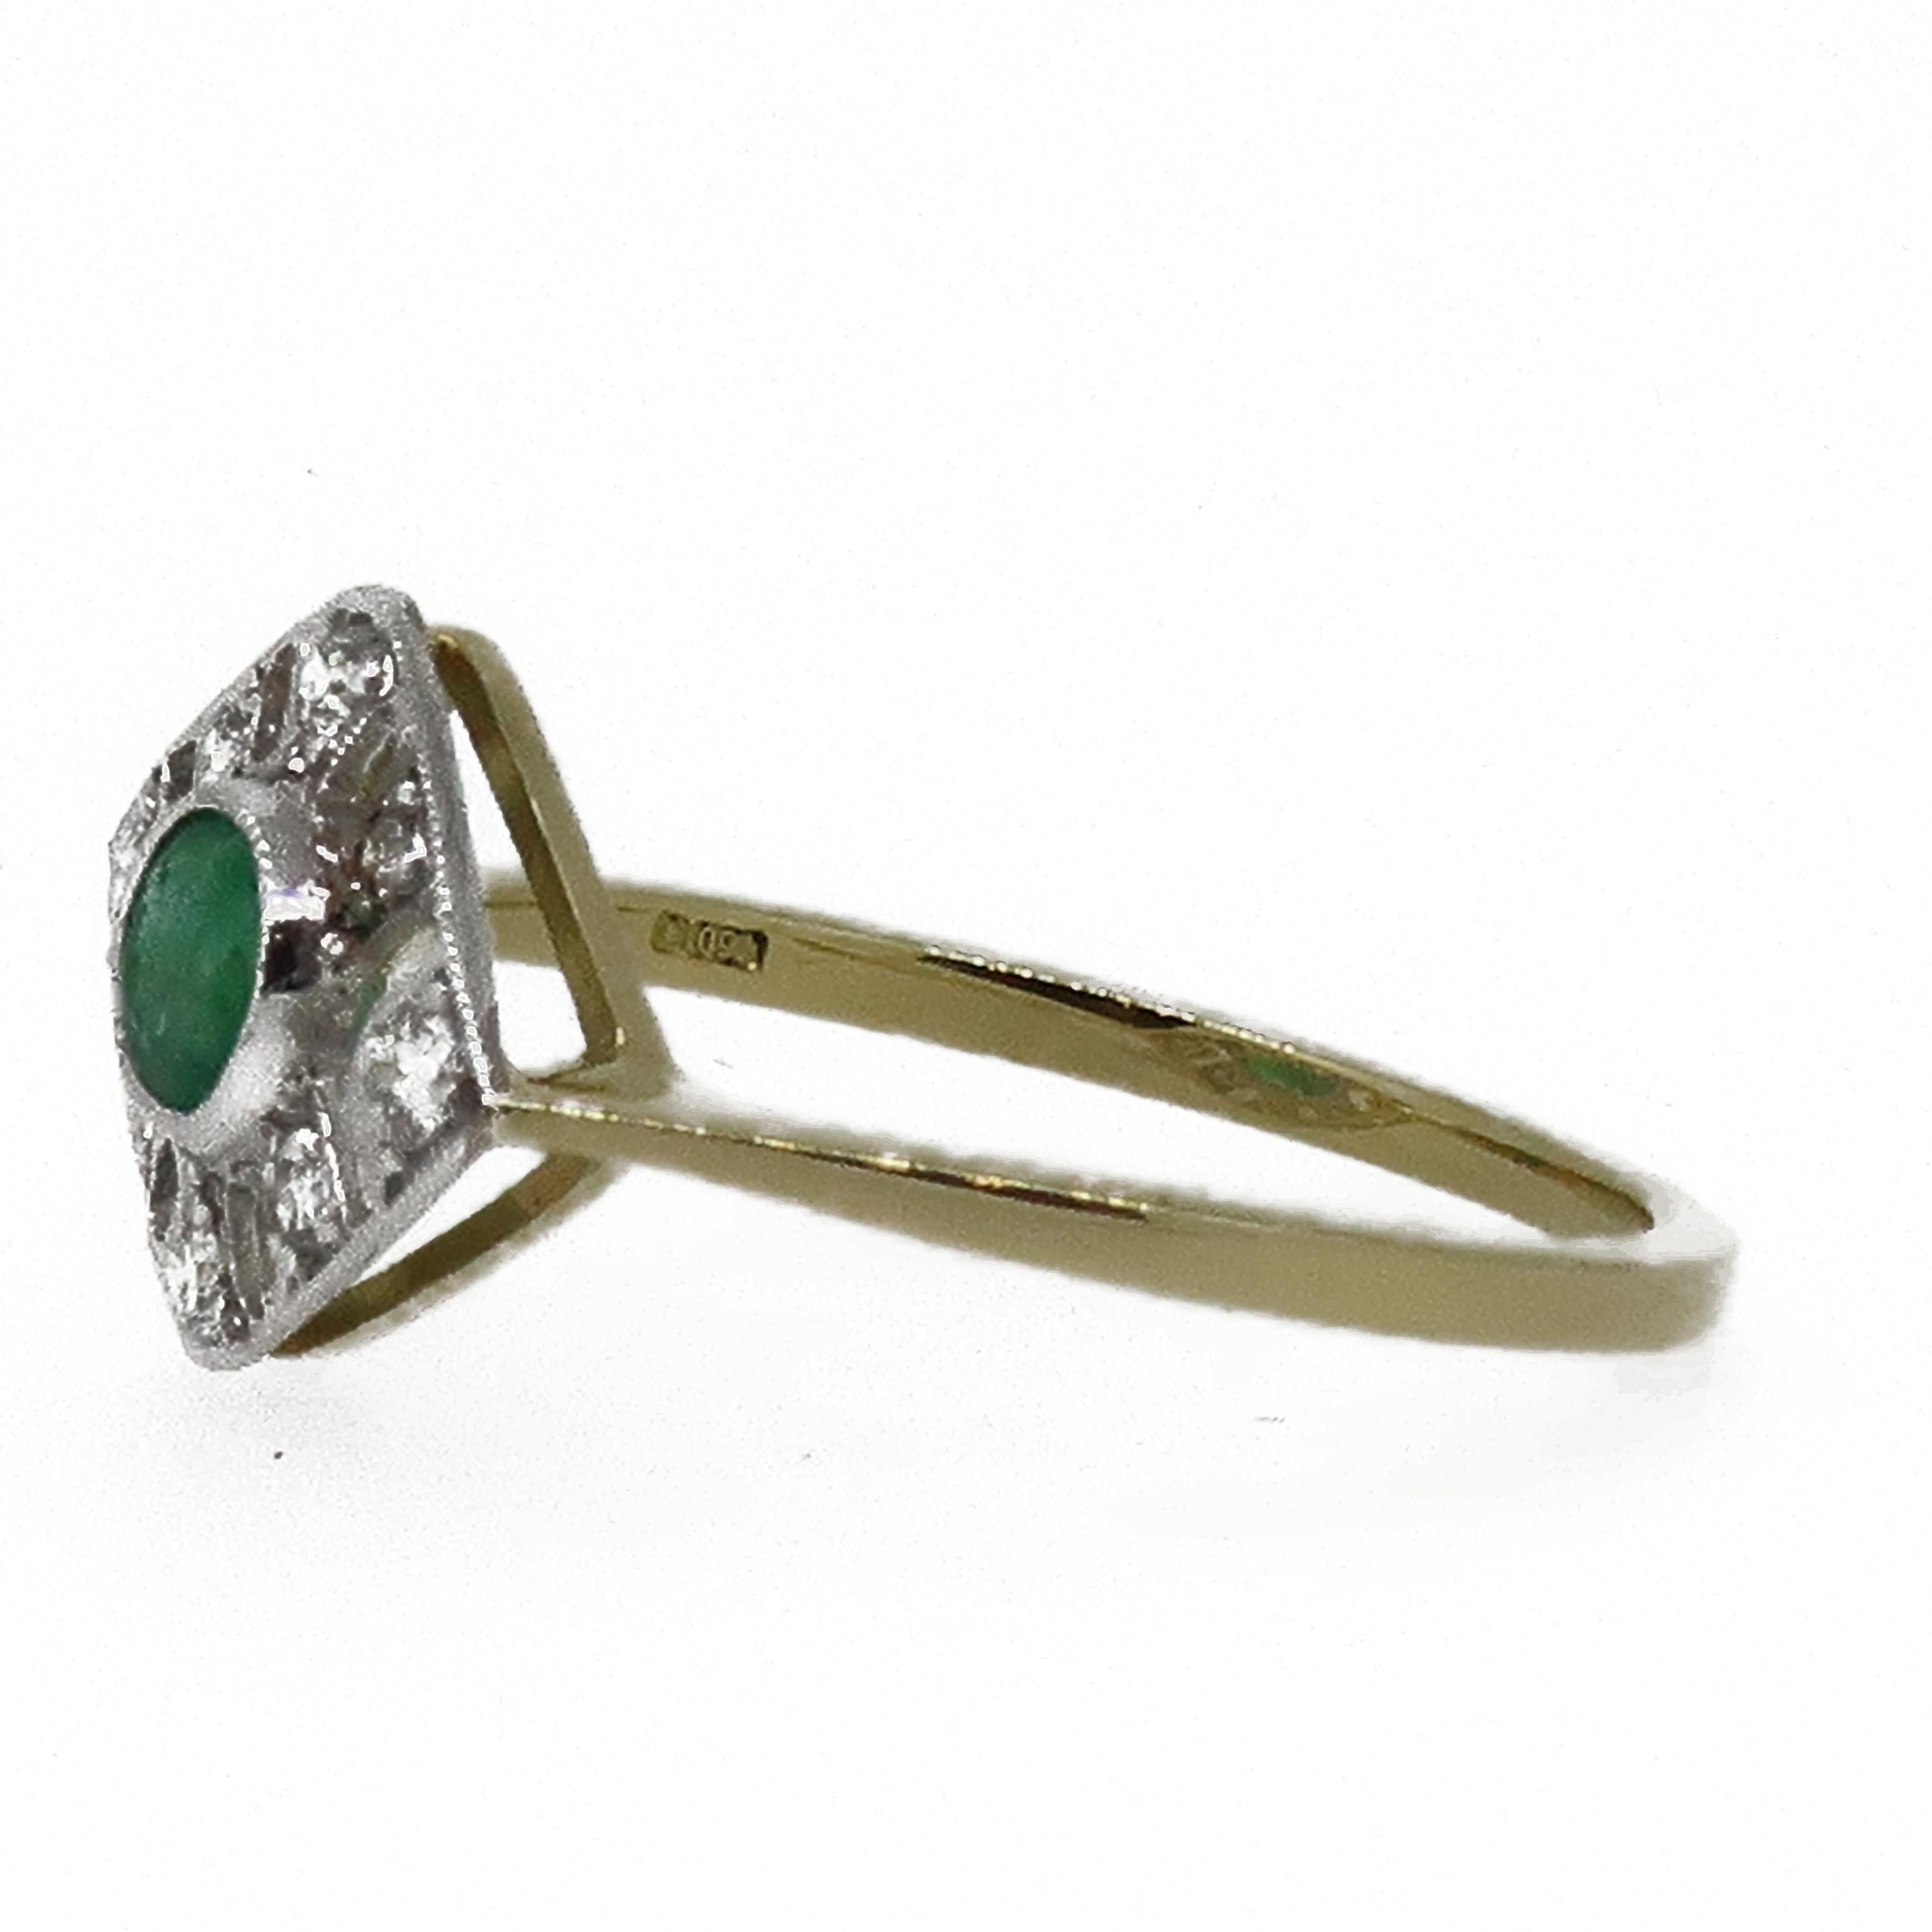 18 Karat Gold Oval Cut Emerald & Diamond Art Deco Style Cluster Ring.

A delicate and dainty oval cut green emerald set in a fine white gold bezel weighing 0.39ct, surrounded by a open frame work of white brilliant cut diamonds all set white gold